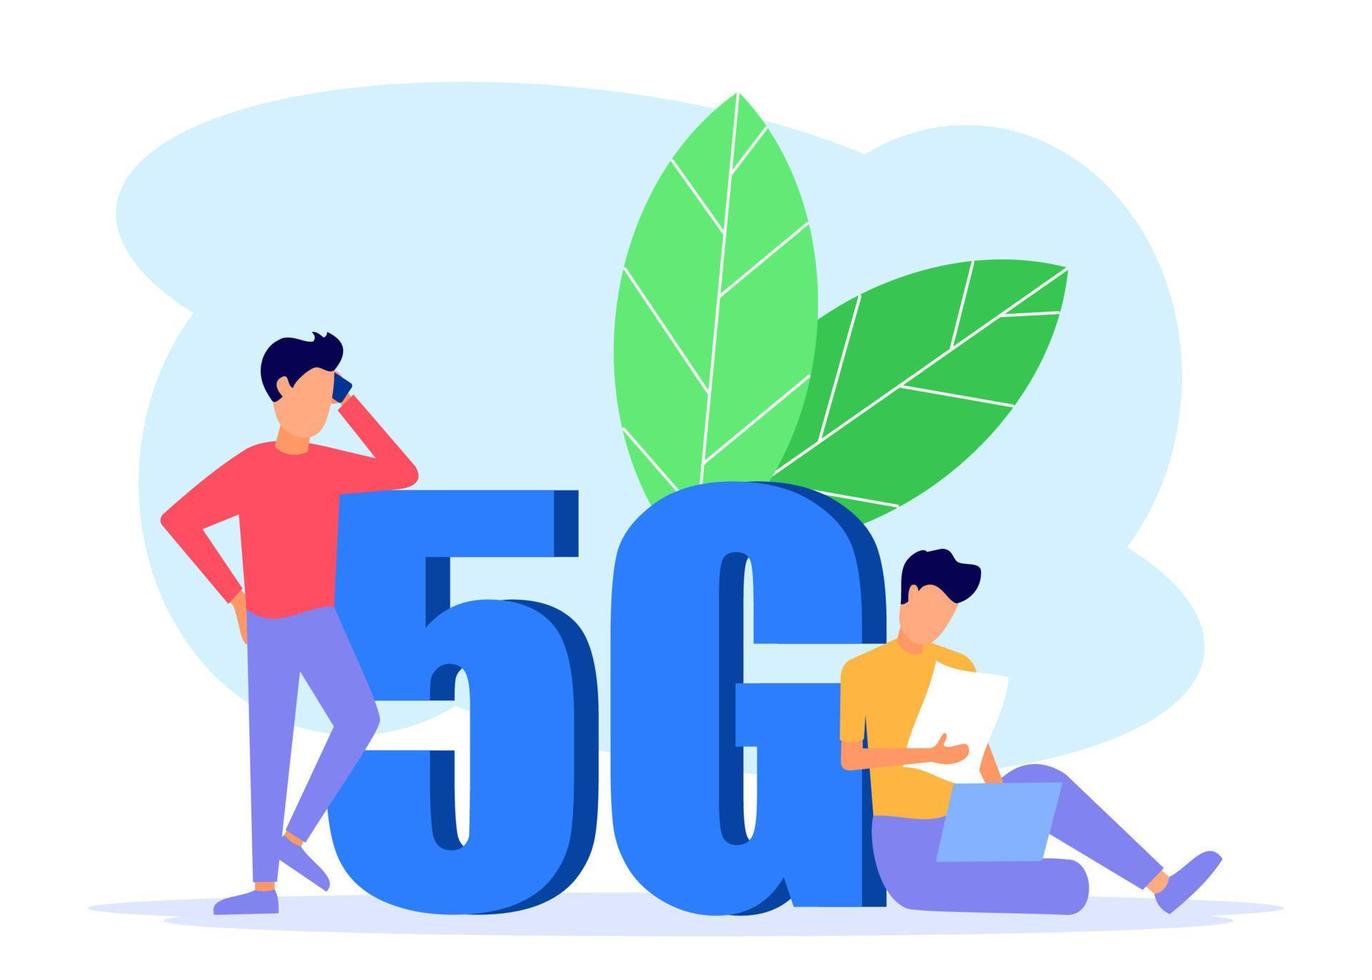 Illustration vector graphic cartoon character of 5G